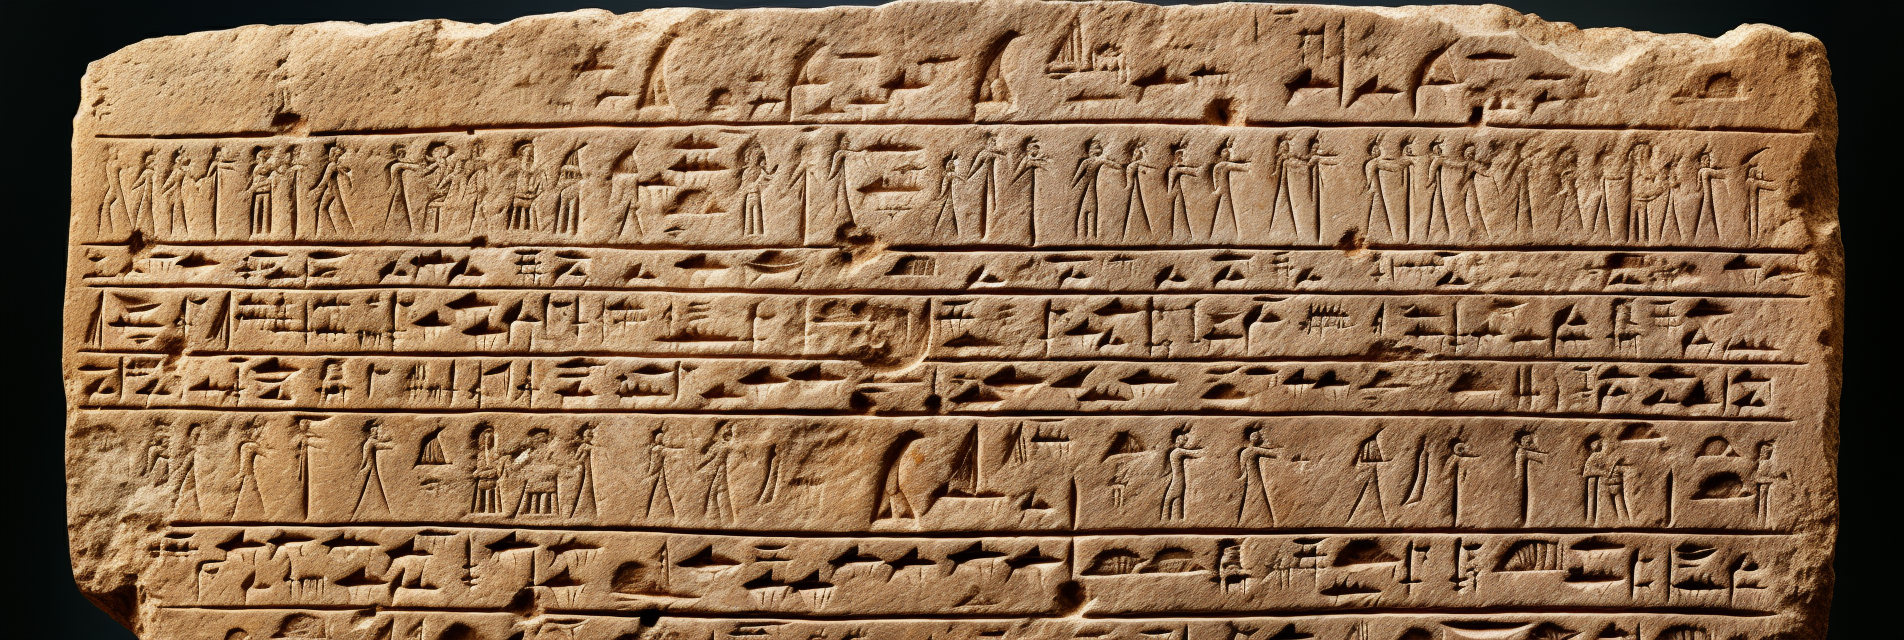 Sumerian tablet depicting aliens and space ships